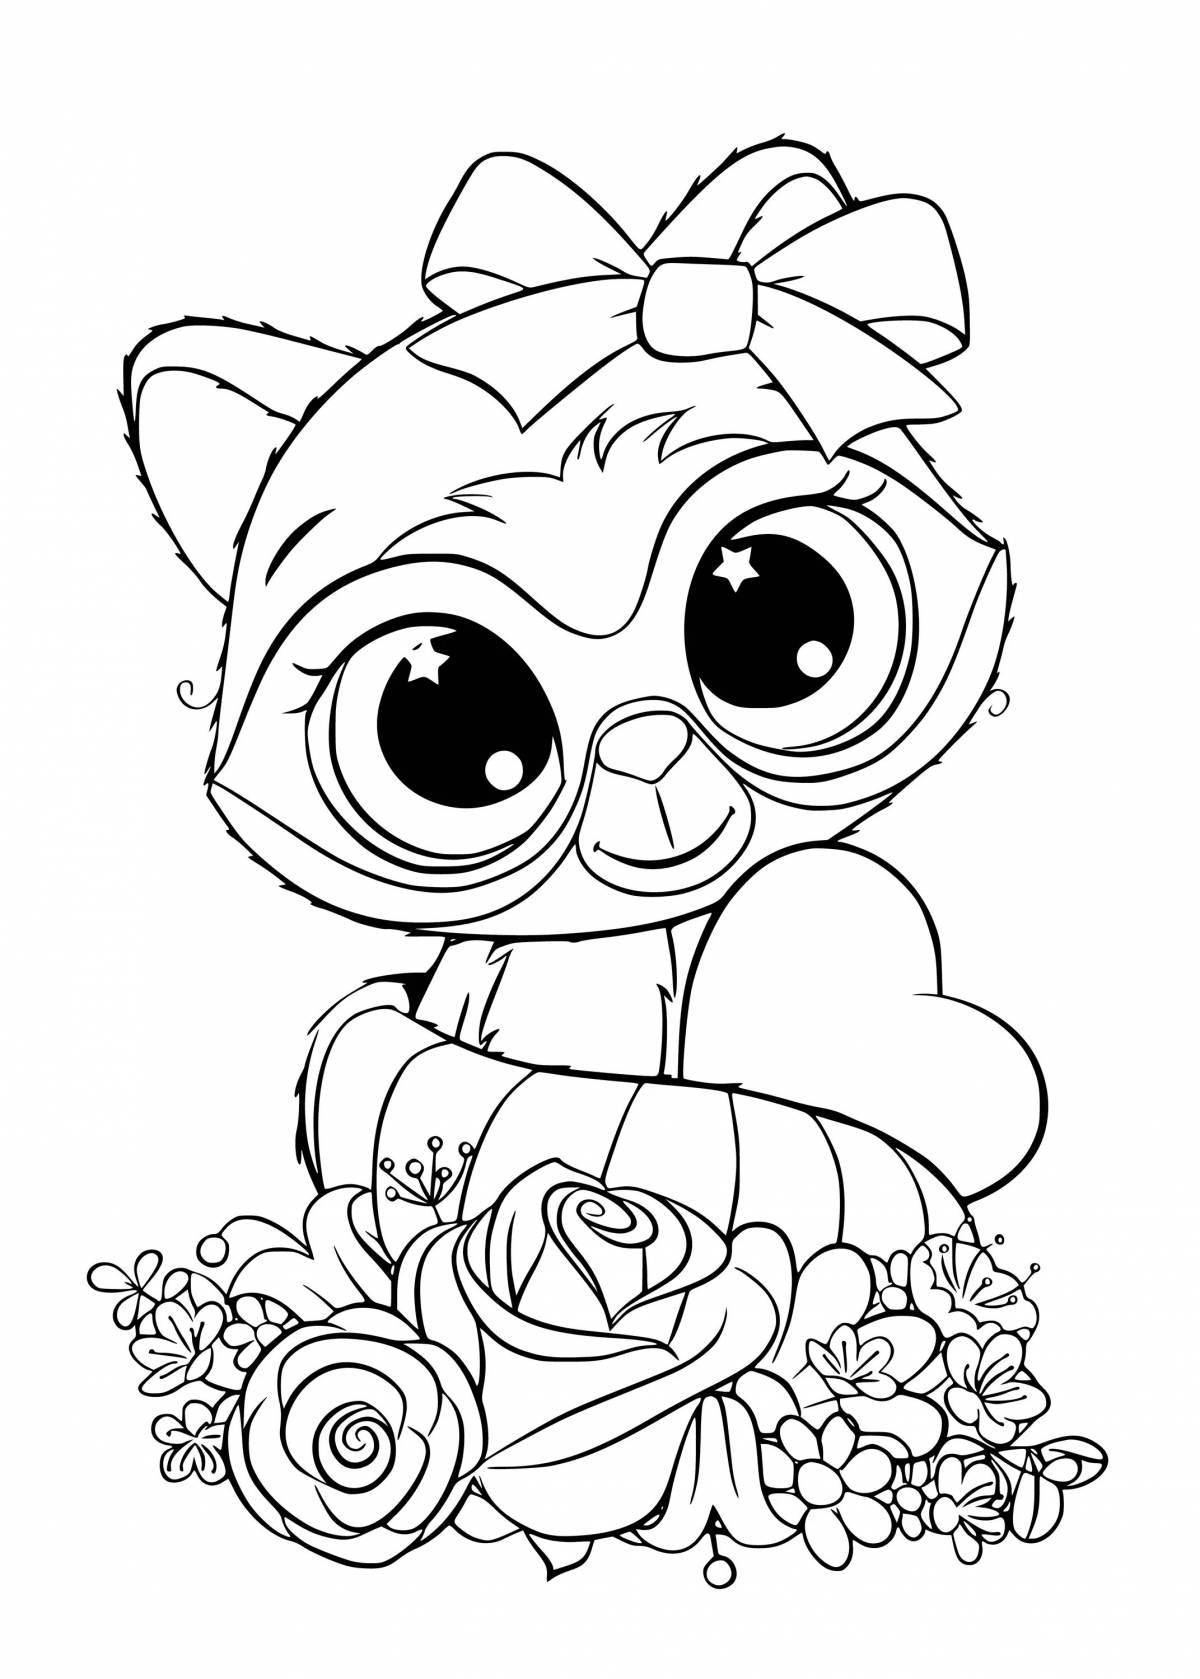 Sweet and fluffy pet coloring pages